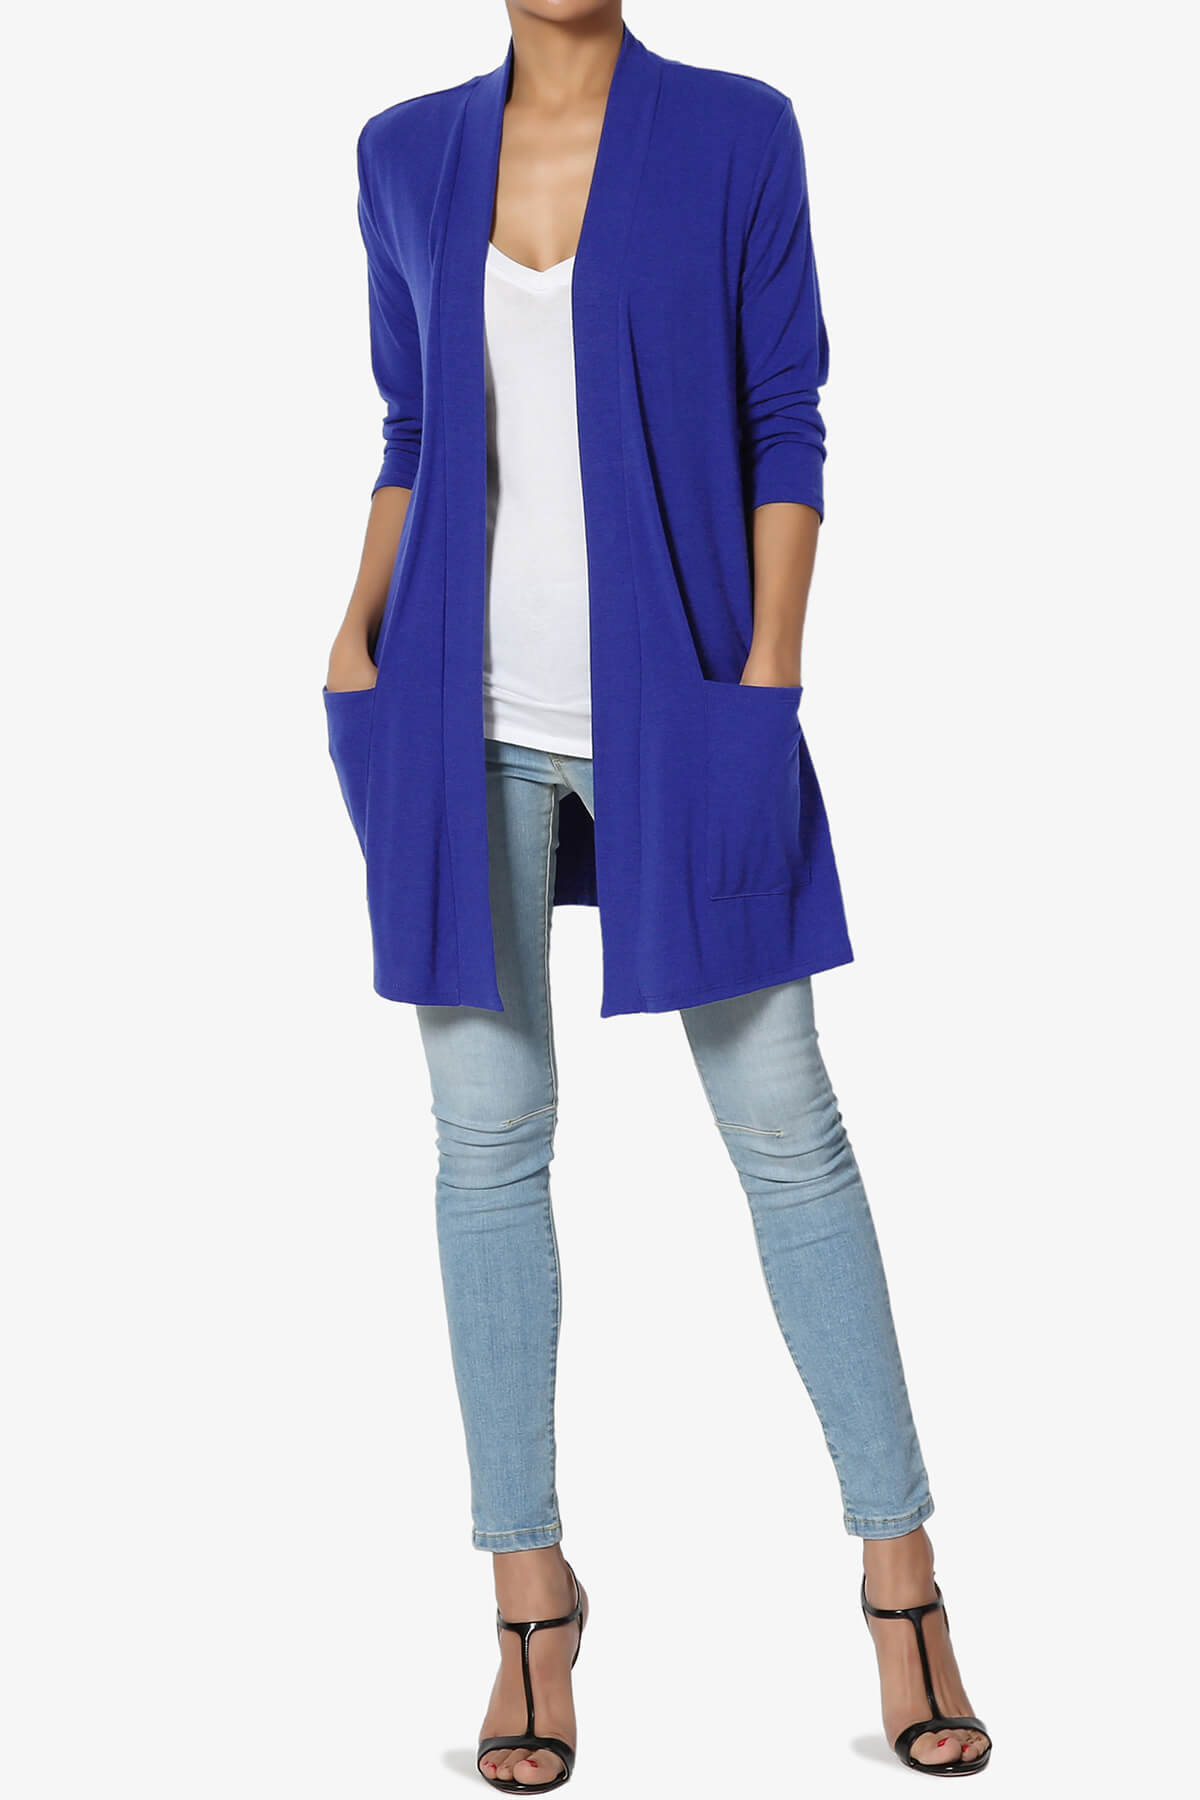 Load image into Gallery viewer, Daday Slouchy Pocket 3/4 Sleeve Cardigan BRIGHT BLUE_6
